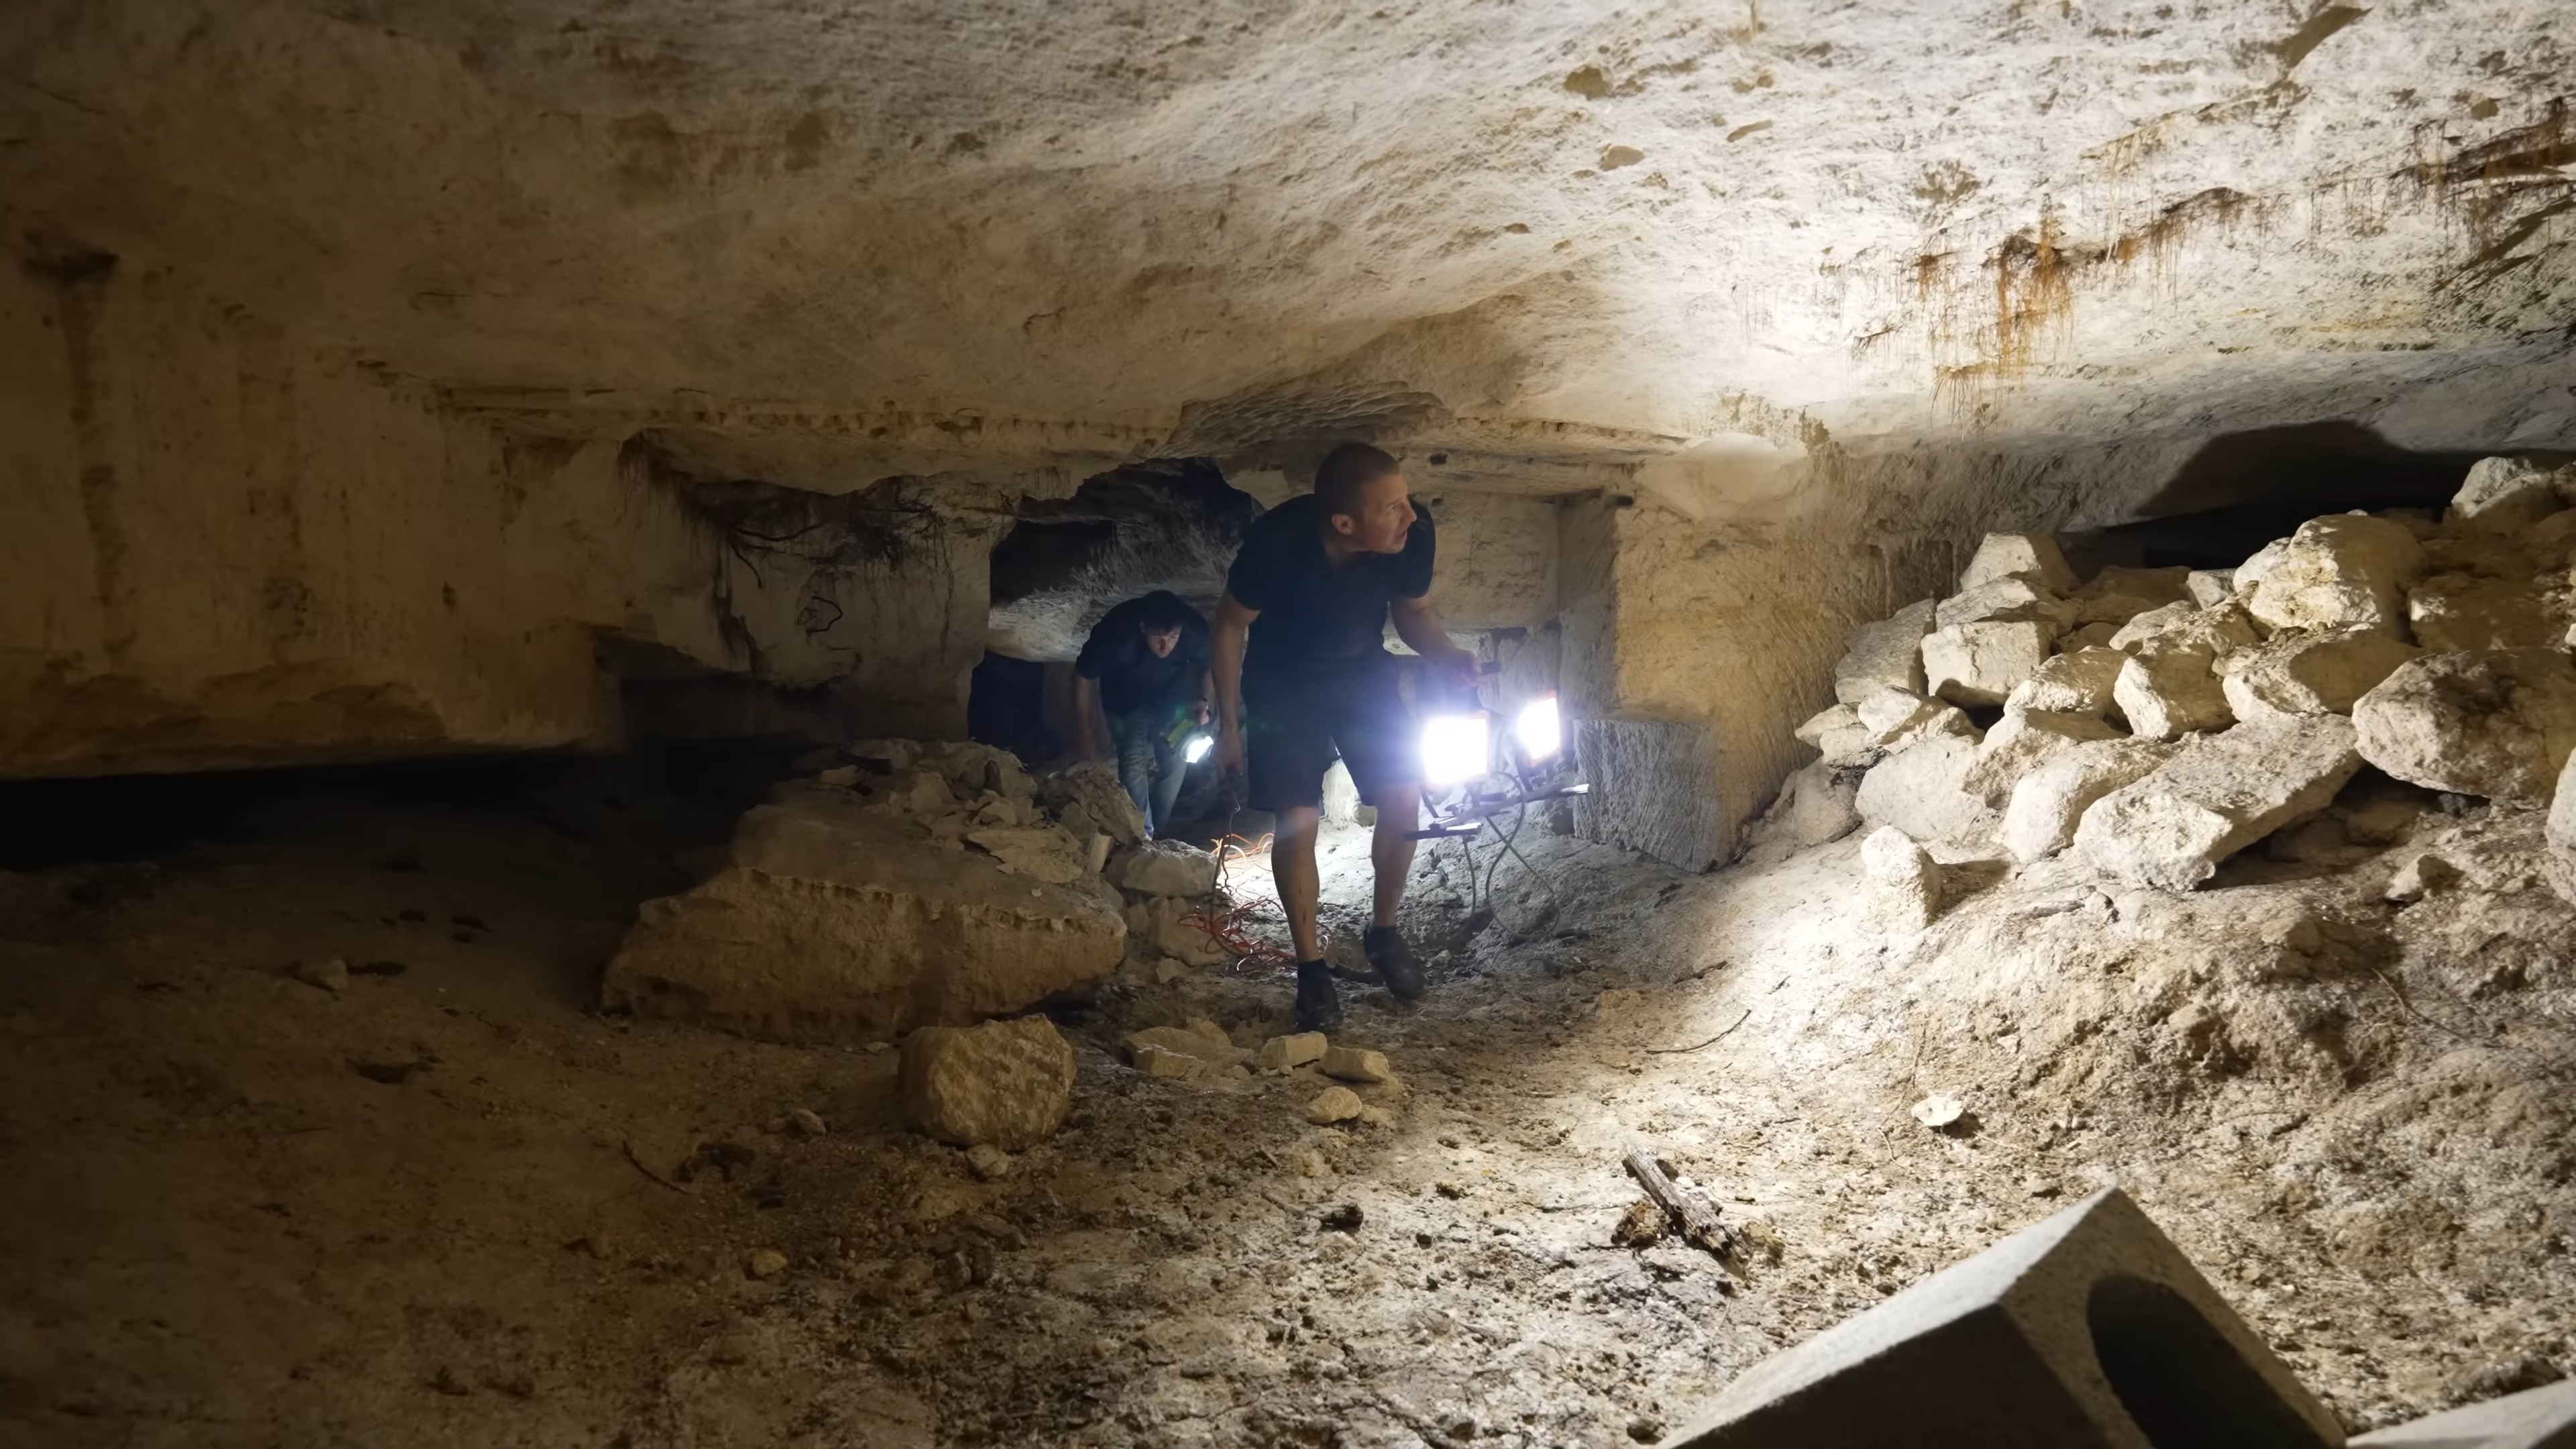 UK Man Renovates Medieval French Château, Finds Vast Tunnel Network Used by  the Resistance During WWII